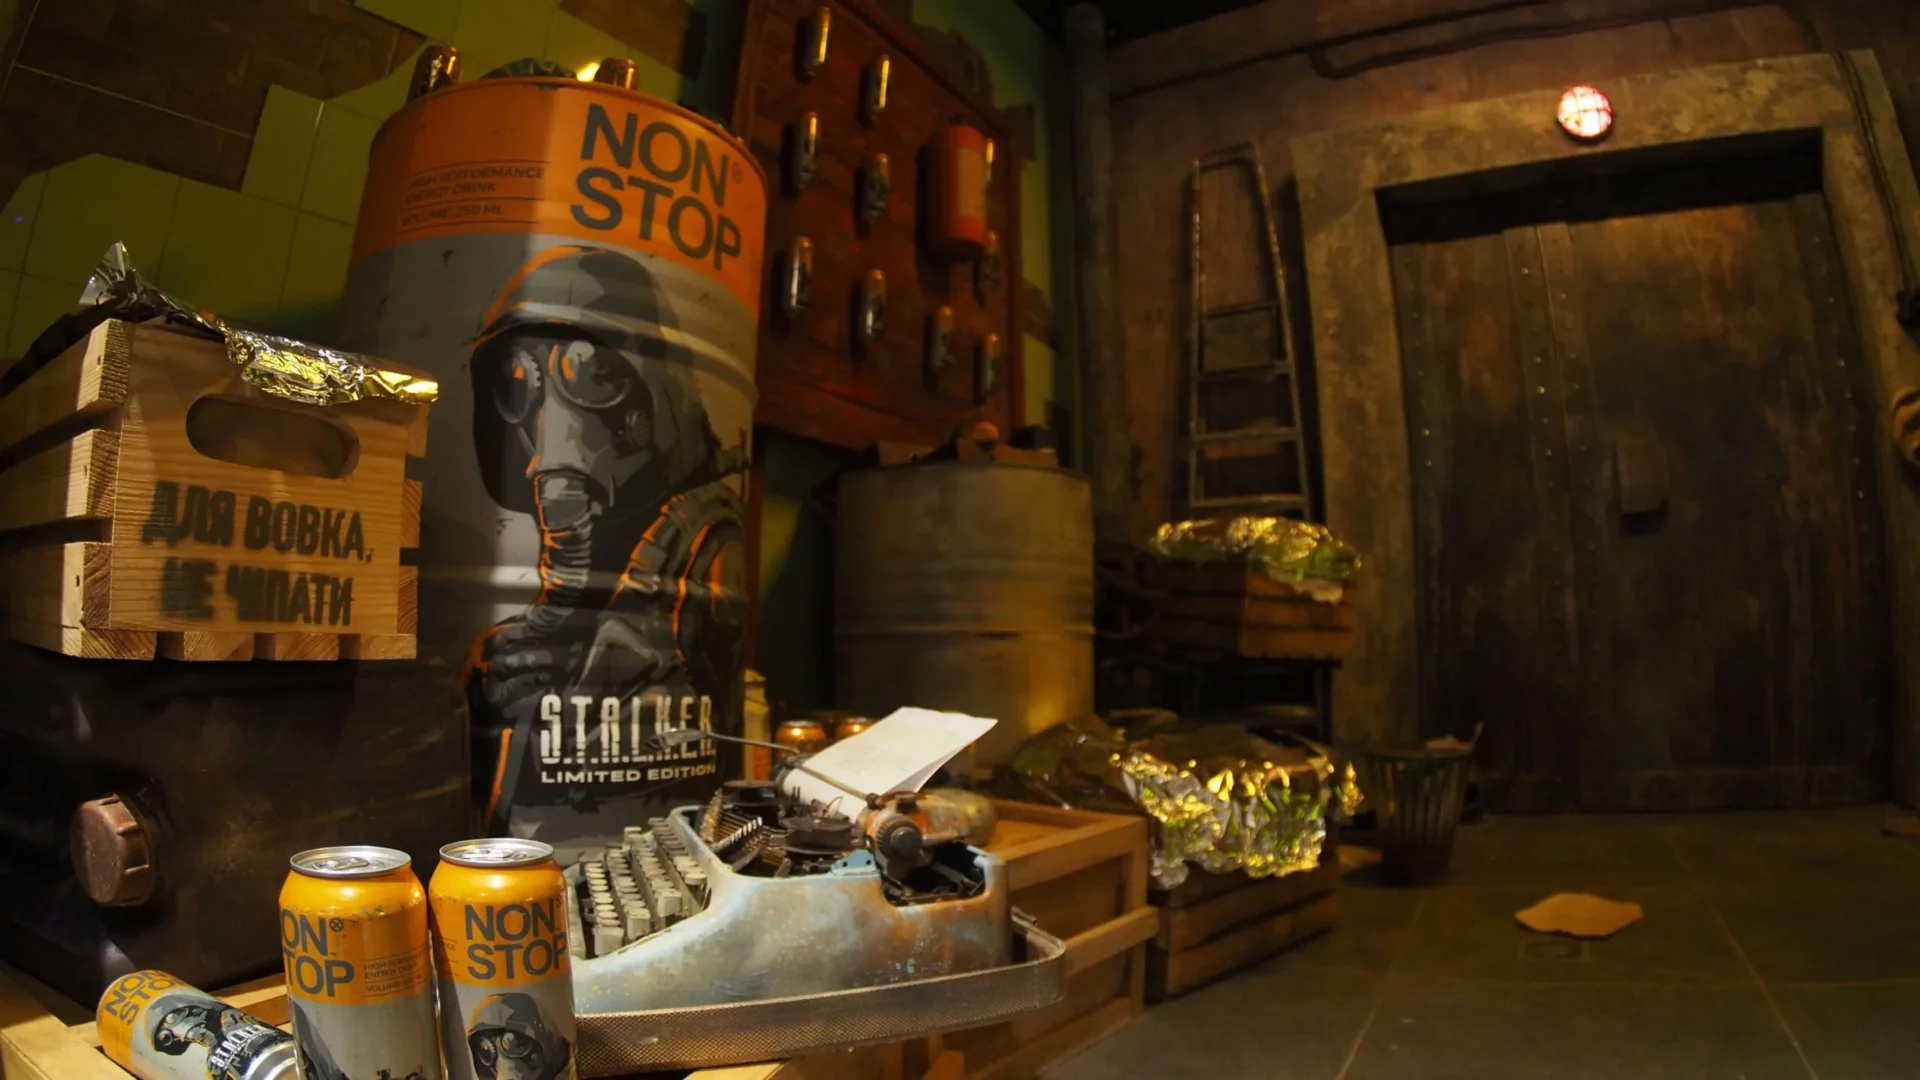 NON STOP S.T.A.L.K.E.R. limited-edition energy drink presented in Kyiv, with over 4 000 cans sold on the very first day